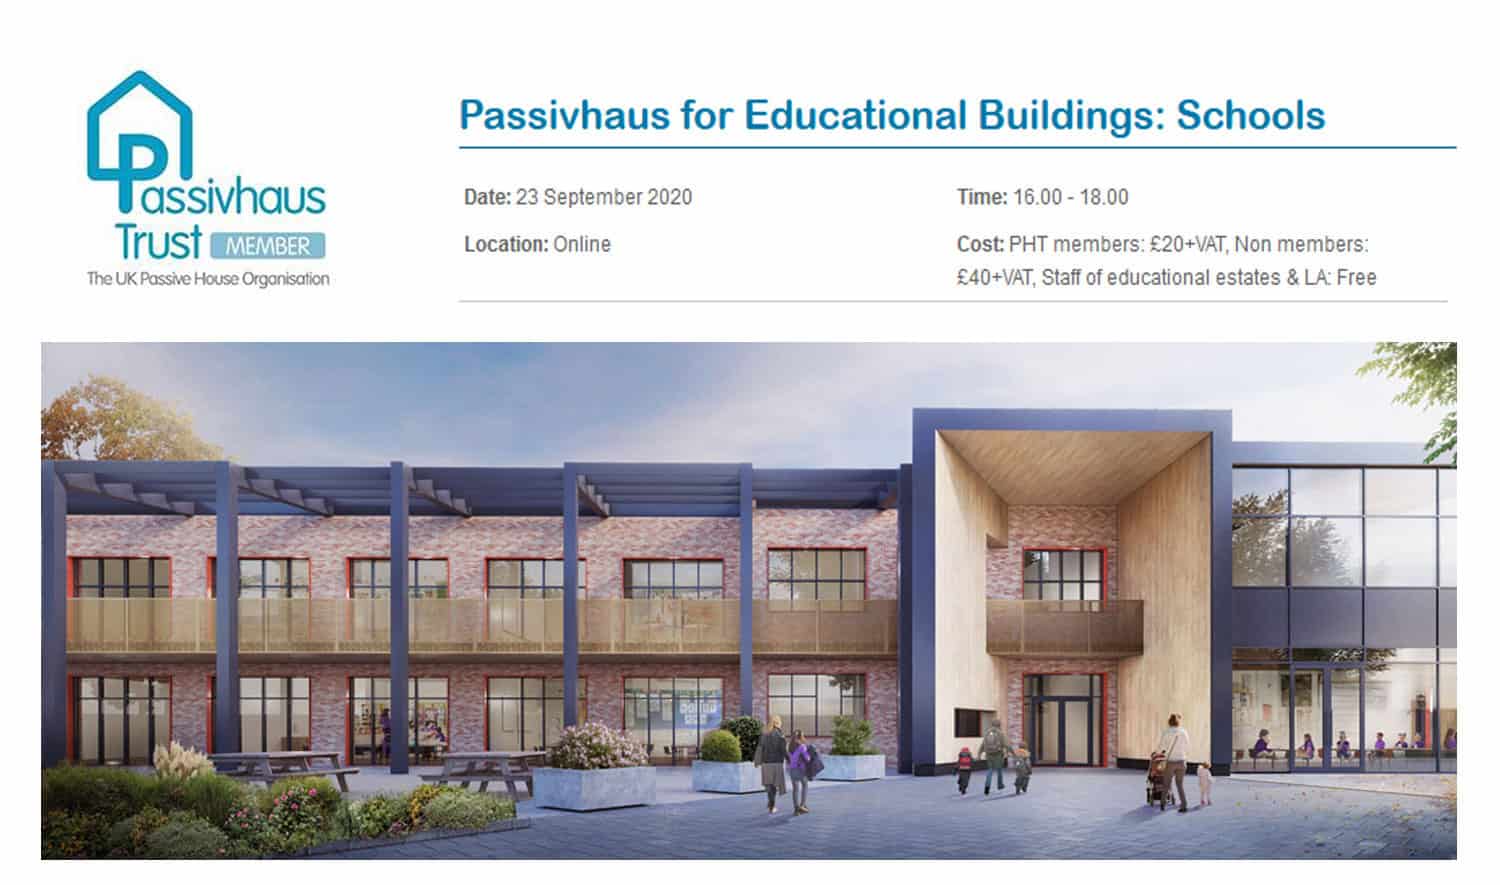 Thornhill Primary School - a Passivhaus school for Central Bedfordshire